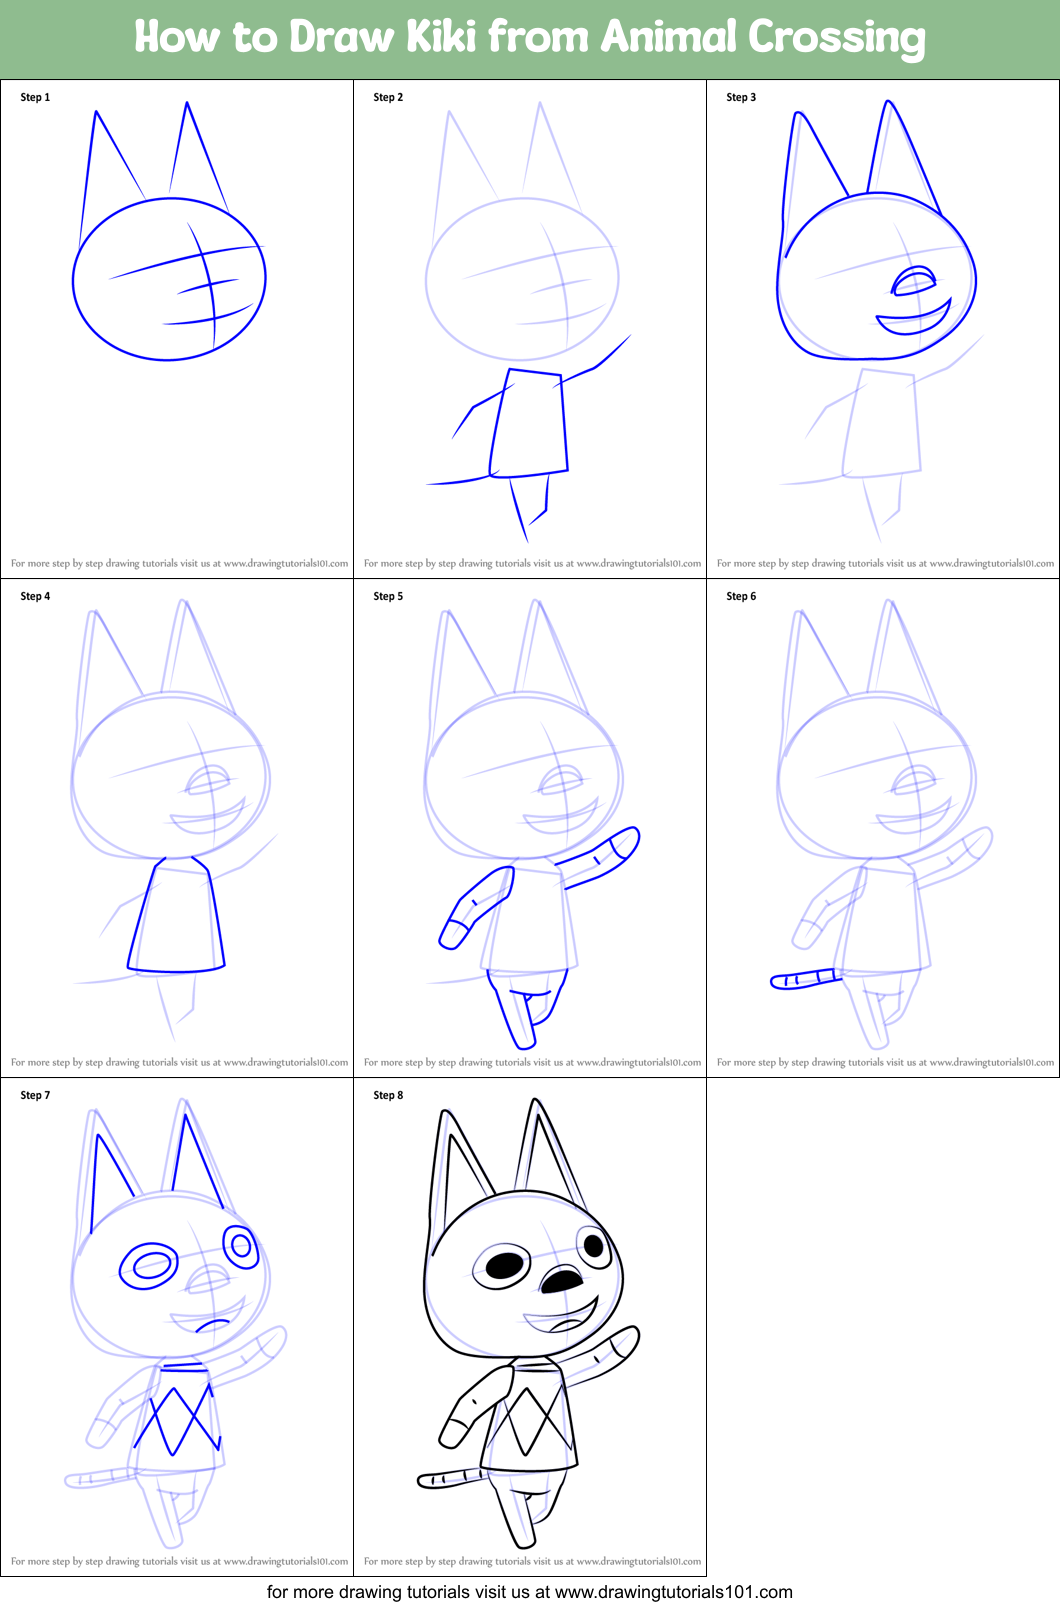 How to Draw Kiki from Animal Crossing printable step by step drawing